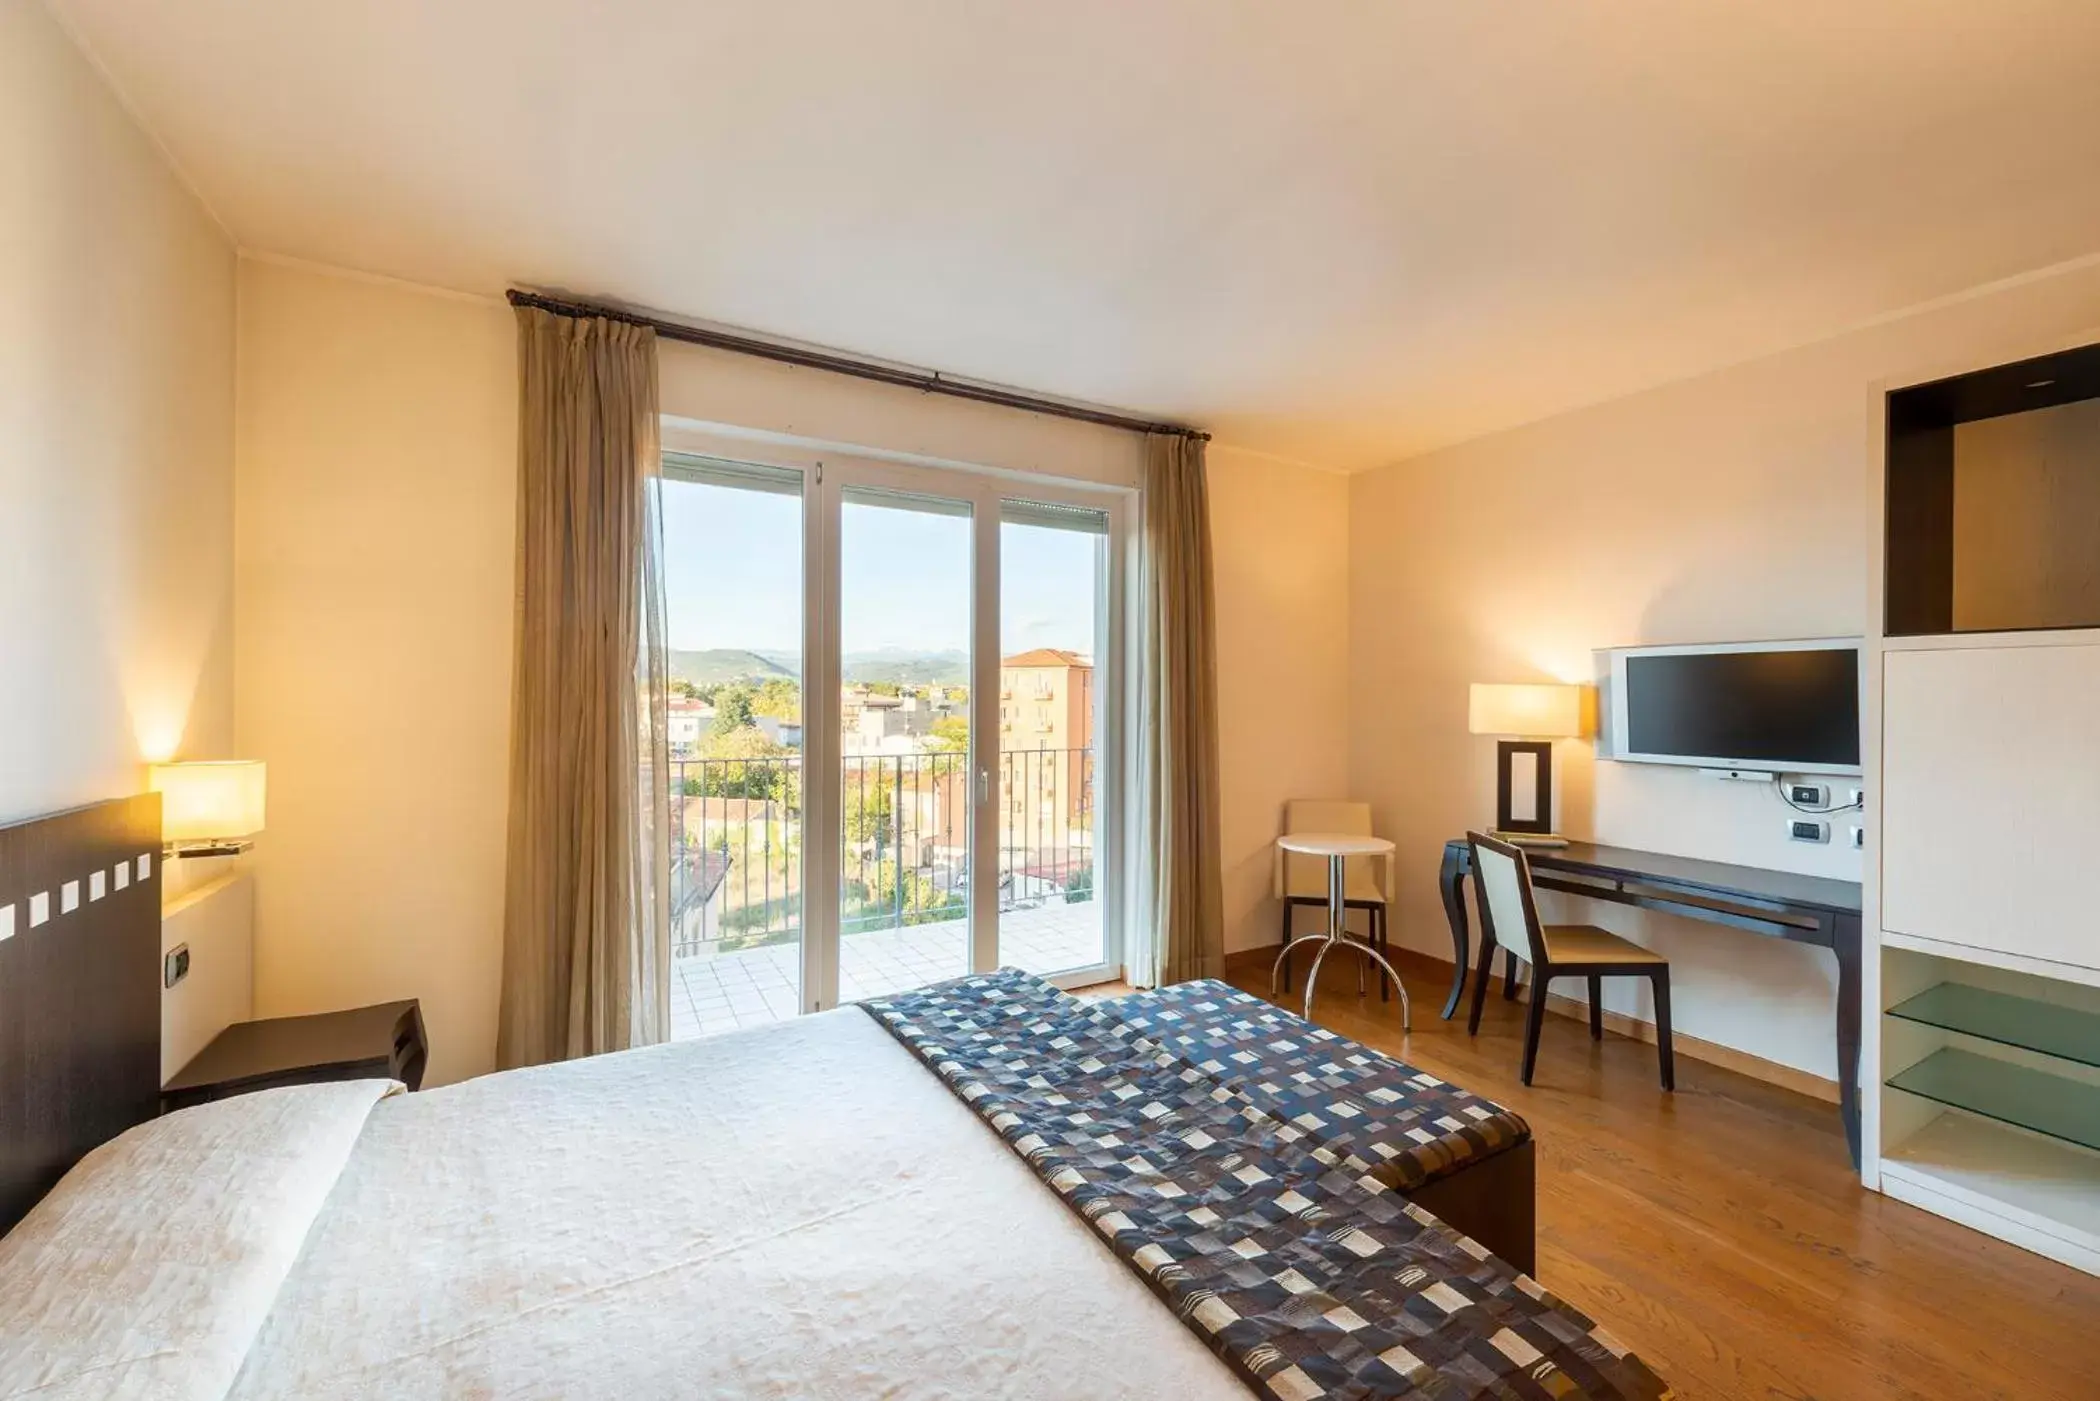 Superior Double Room with Balcony in Hotel San Marco Fitness Pool & Spa